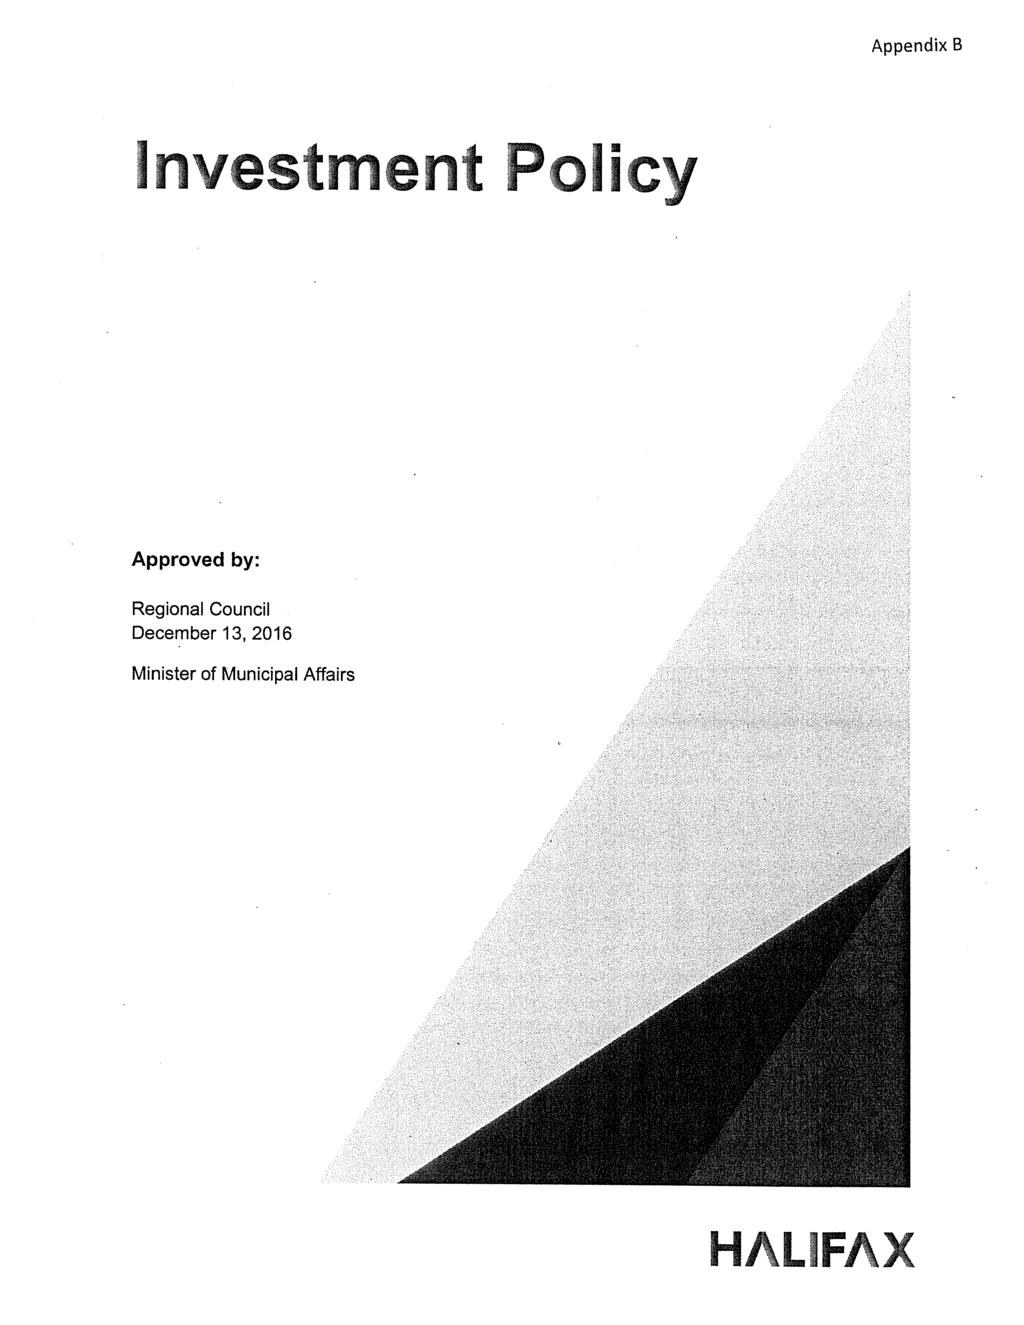 Appendix B investment Policy Approved by: Regional